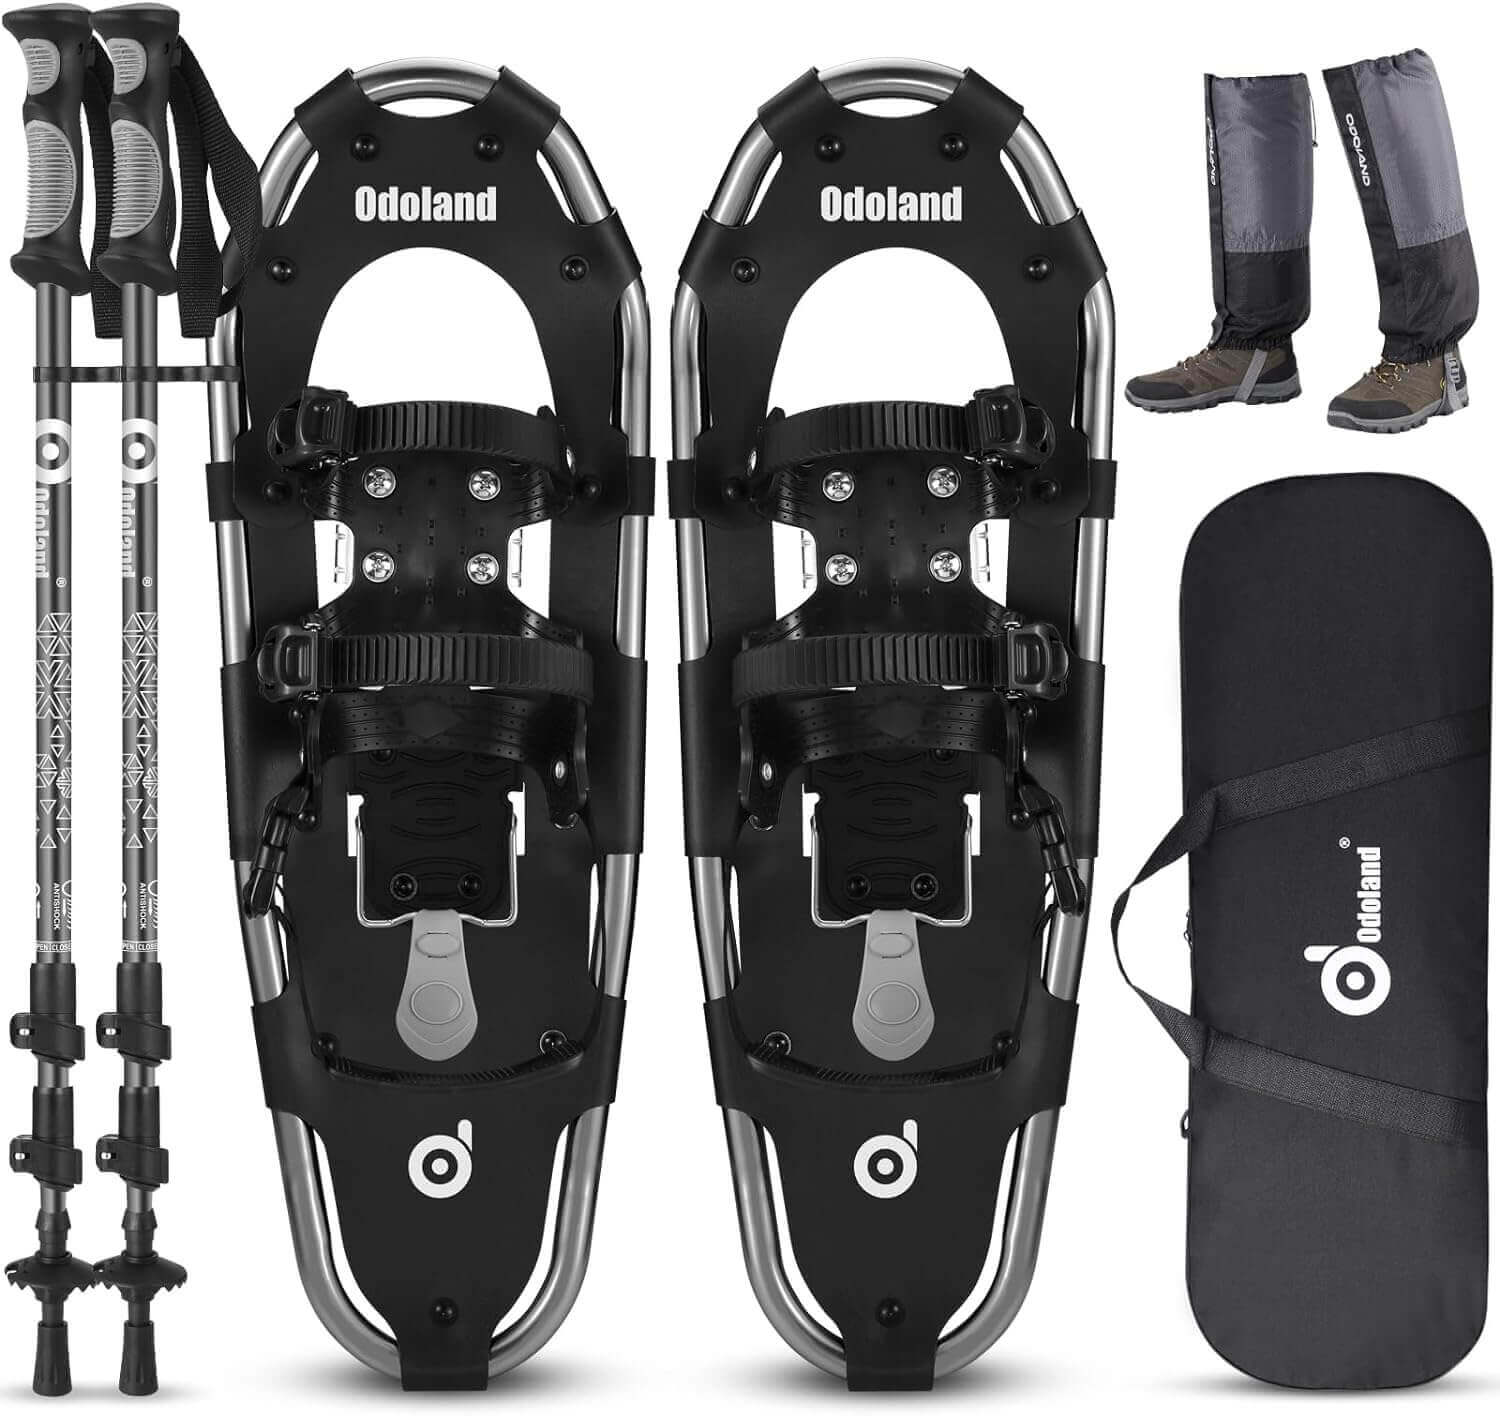 Shop The Latest >4-in-1 Snowshoes Set-Trekking Poles, Snow Leg Gaiters & Bag > *Only $121.49*> From The Top Brand > *Odolandl* > Shop Now and Get Free Shipping On Orders Over $45.00 >*Shop Earth Foot*